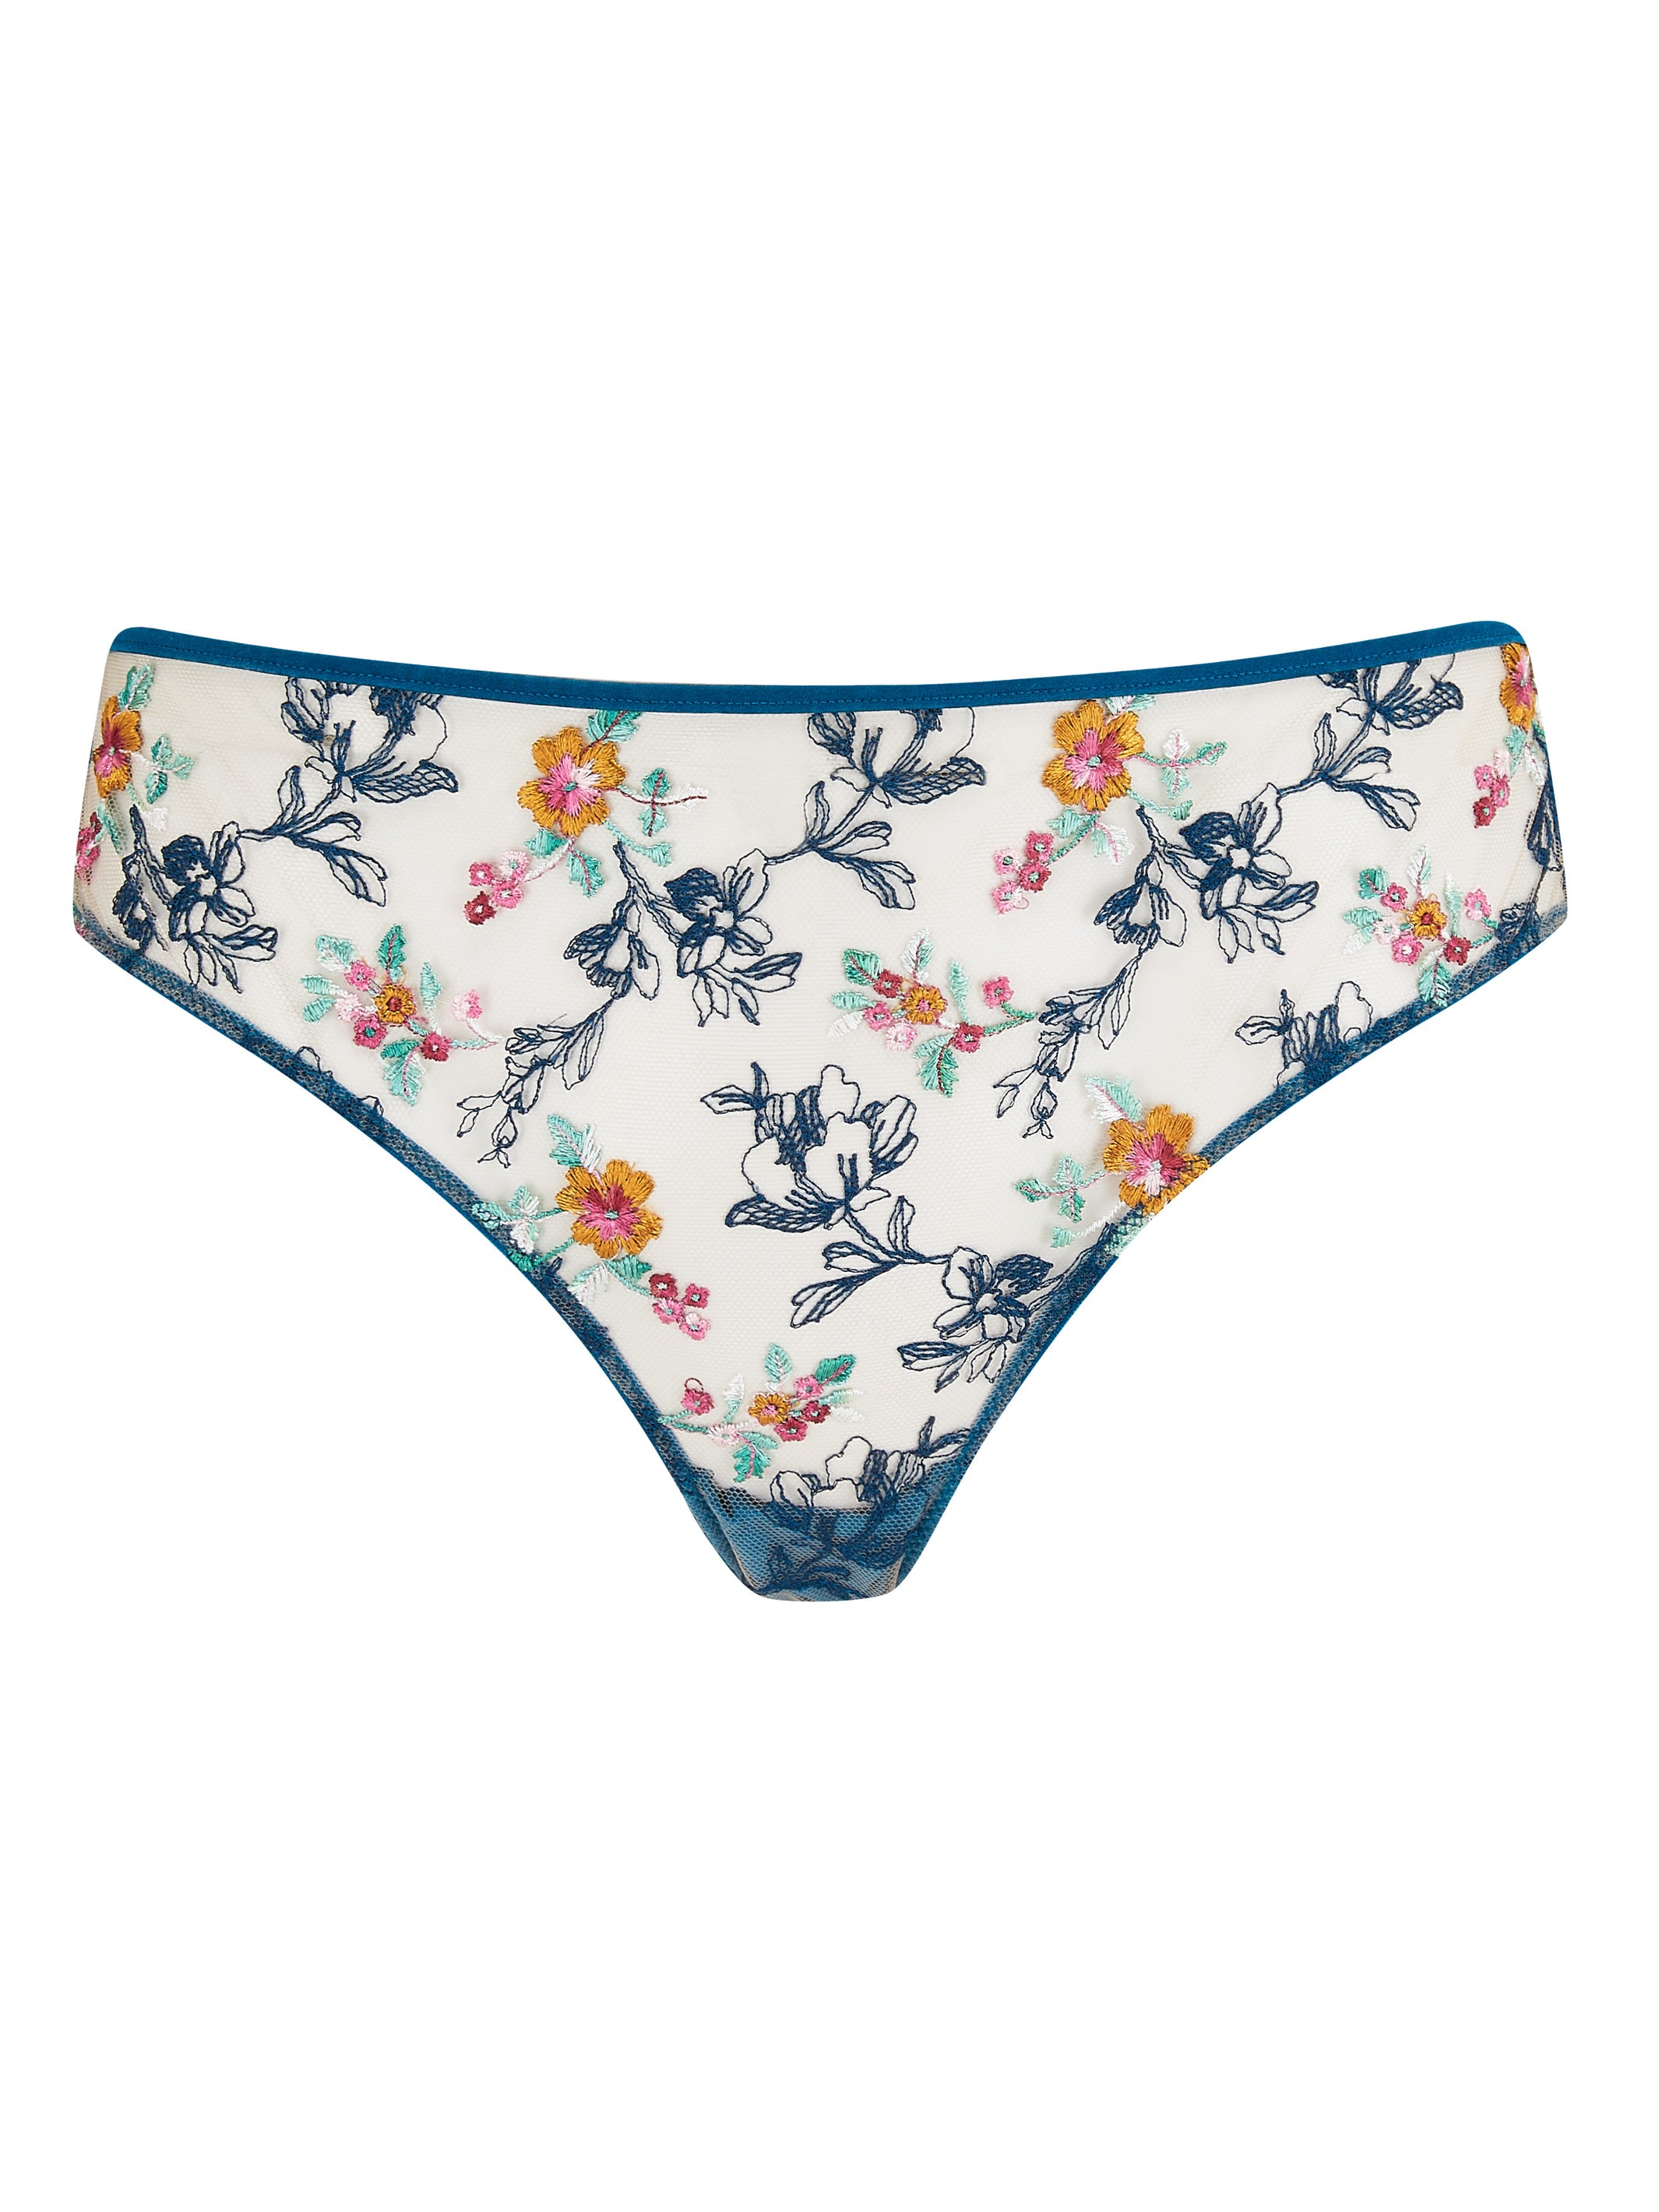 Evelyn cyan floral embroidered knickers - Katherine Hamilton